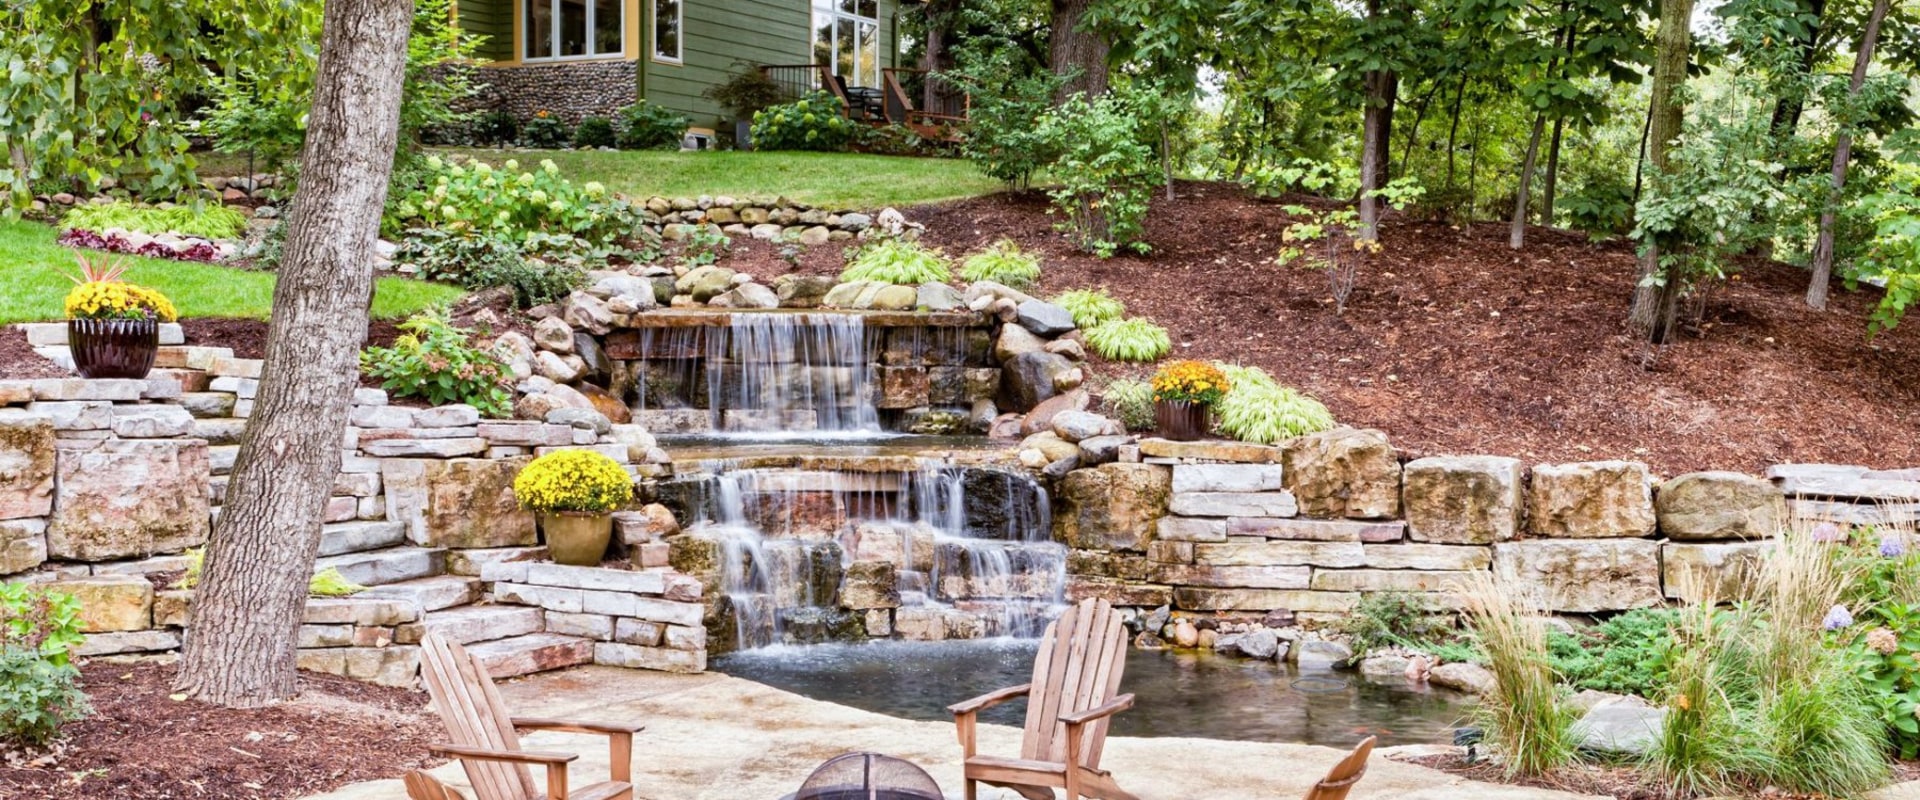 What is yard hardscape?